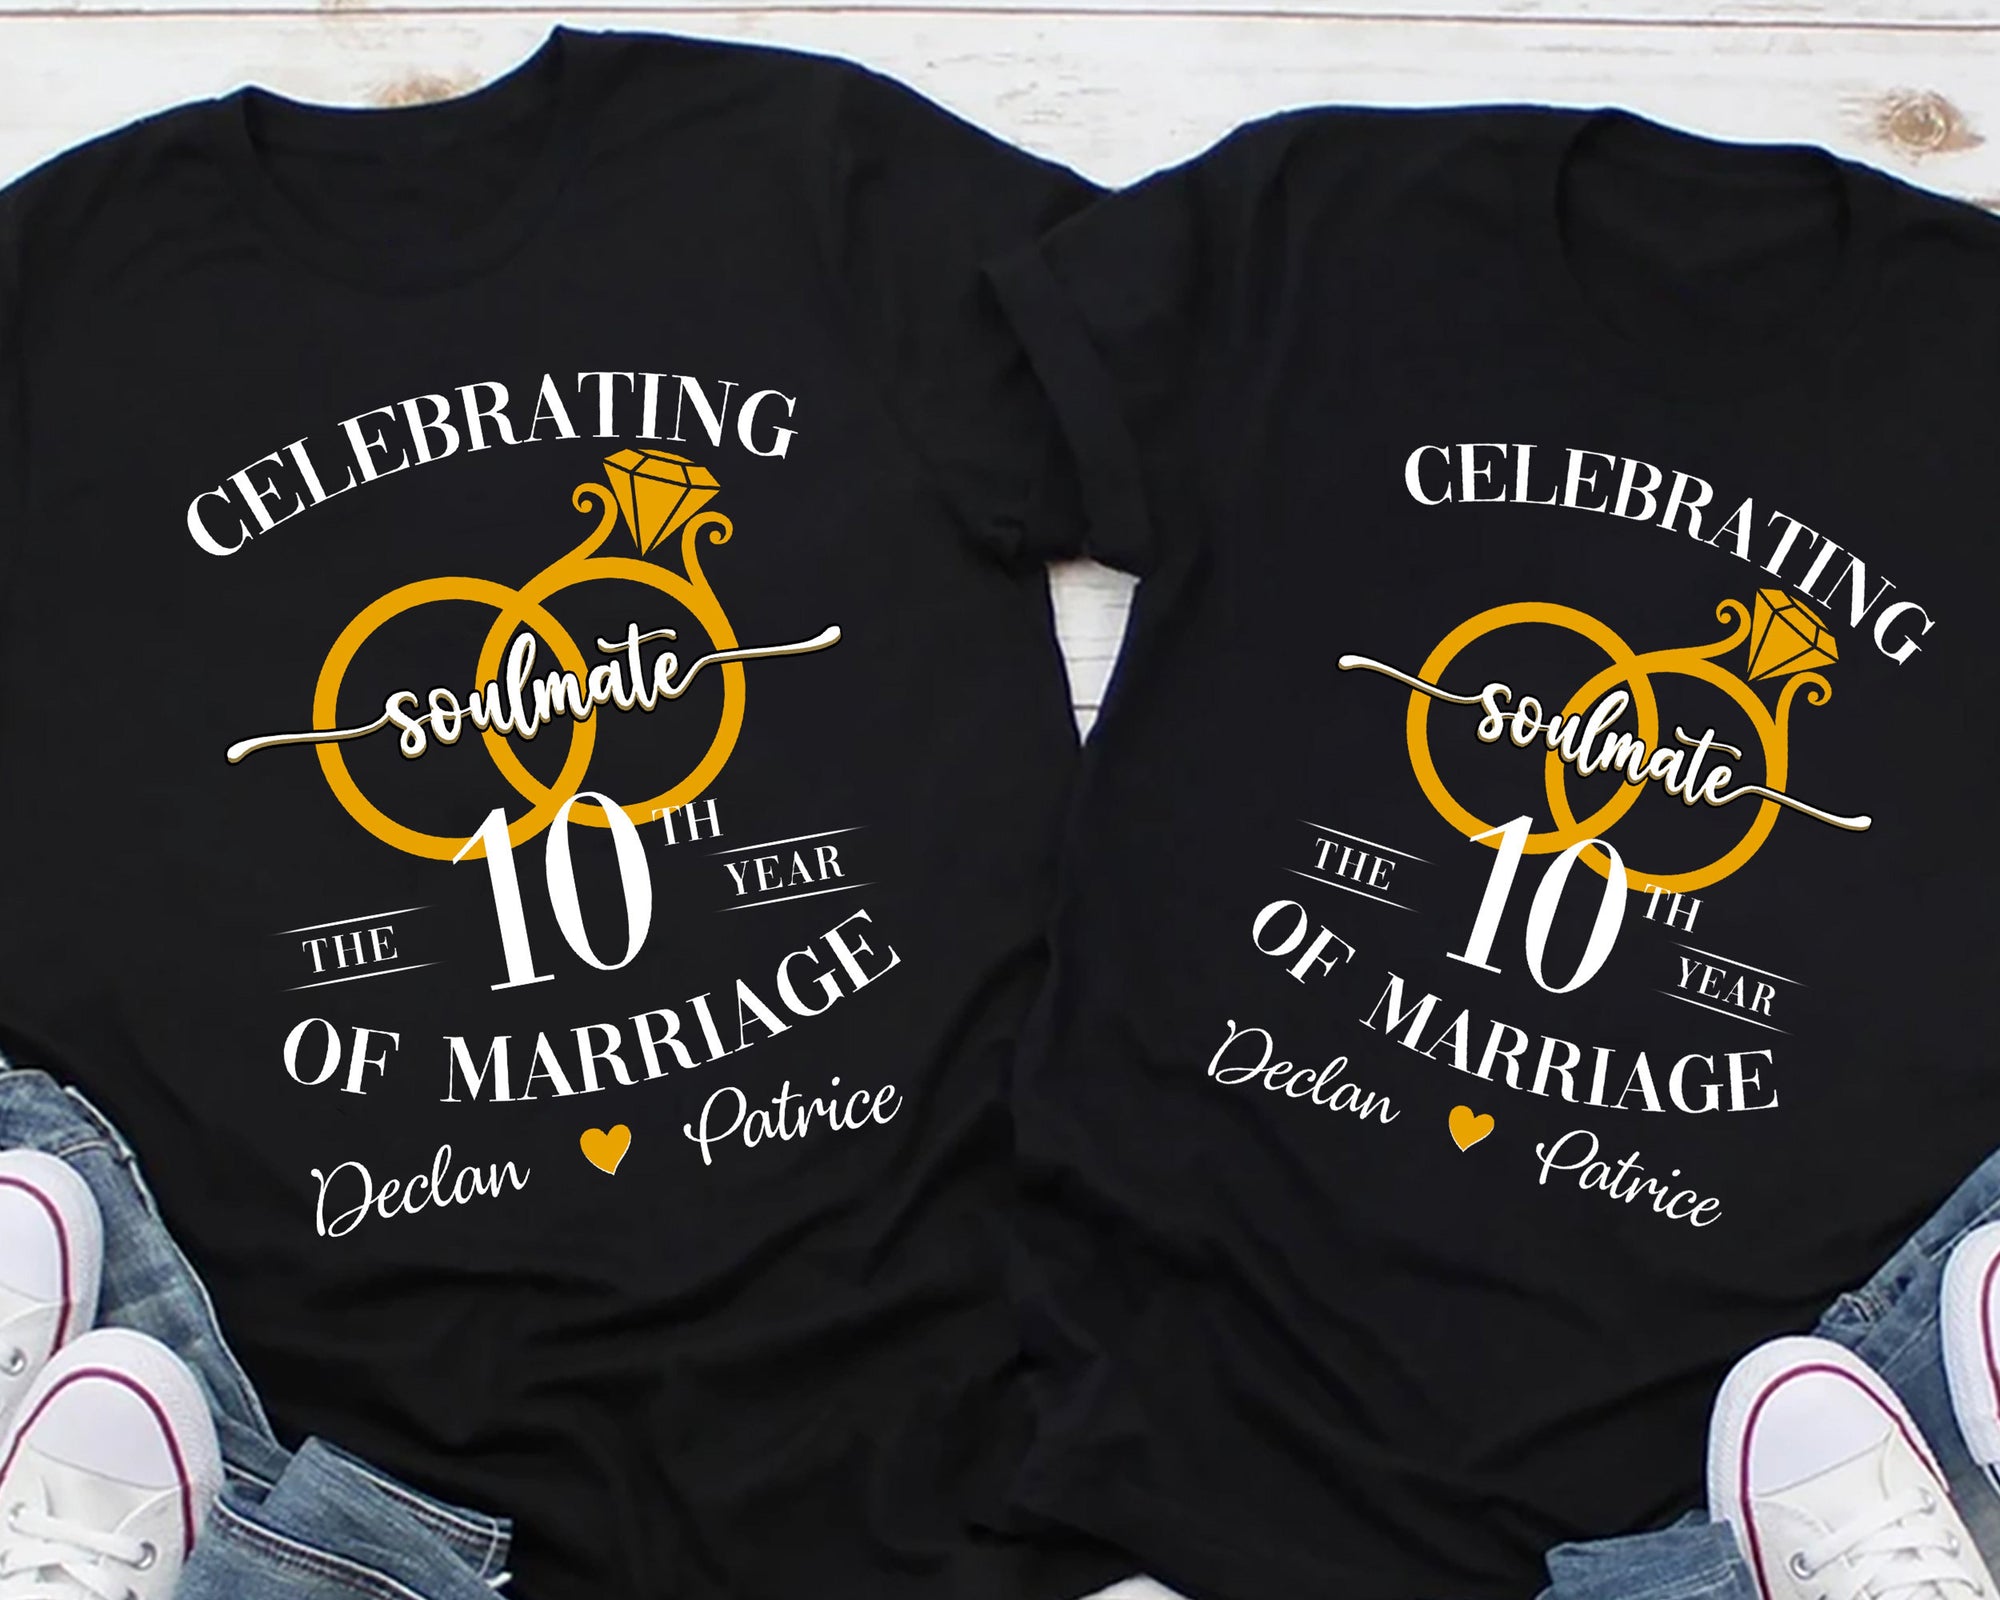 Celebrating Soulmate Marriage - Personalized Shirt - Gift For Couple, Anniversary Gift